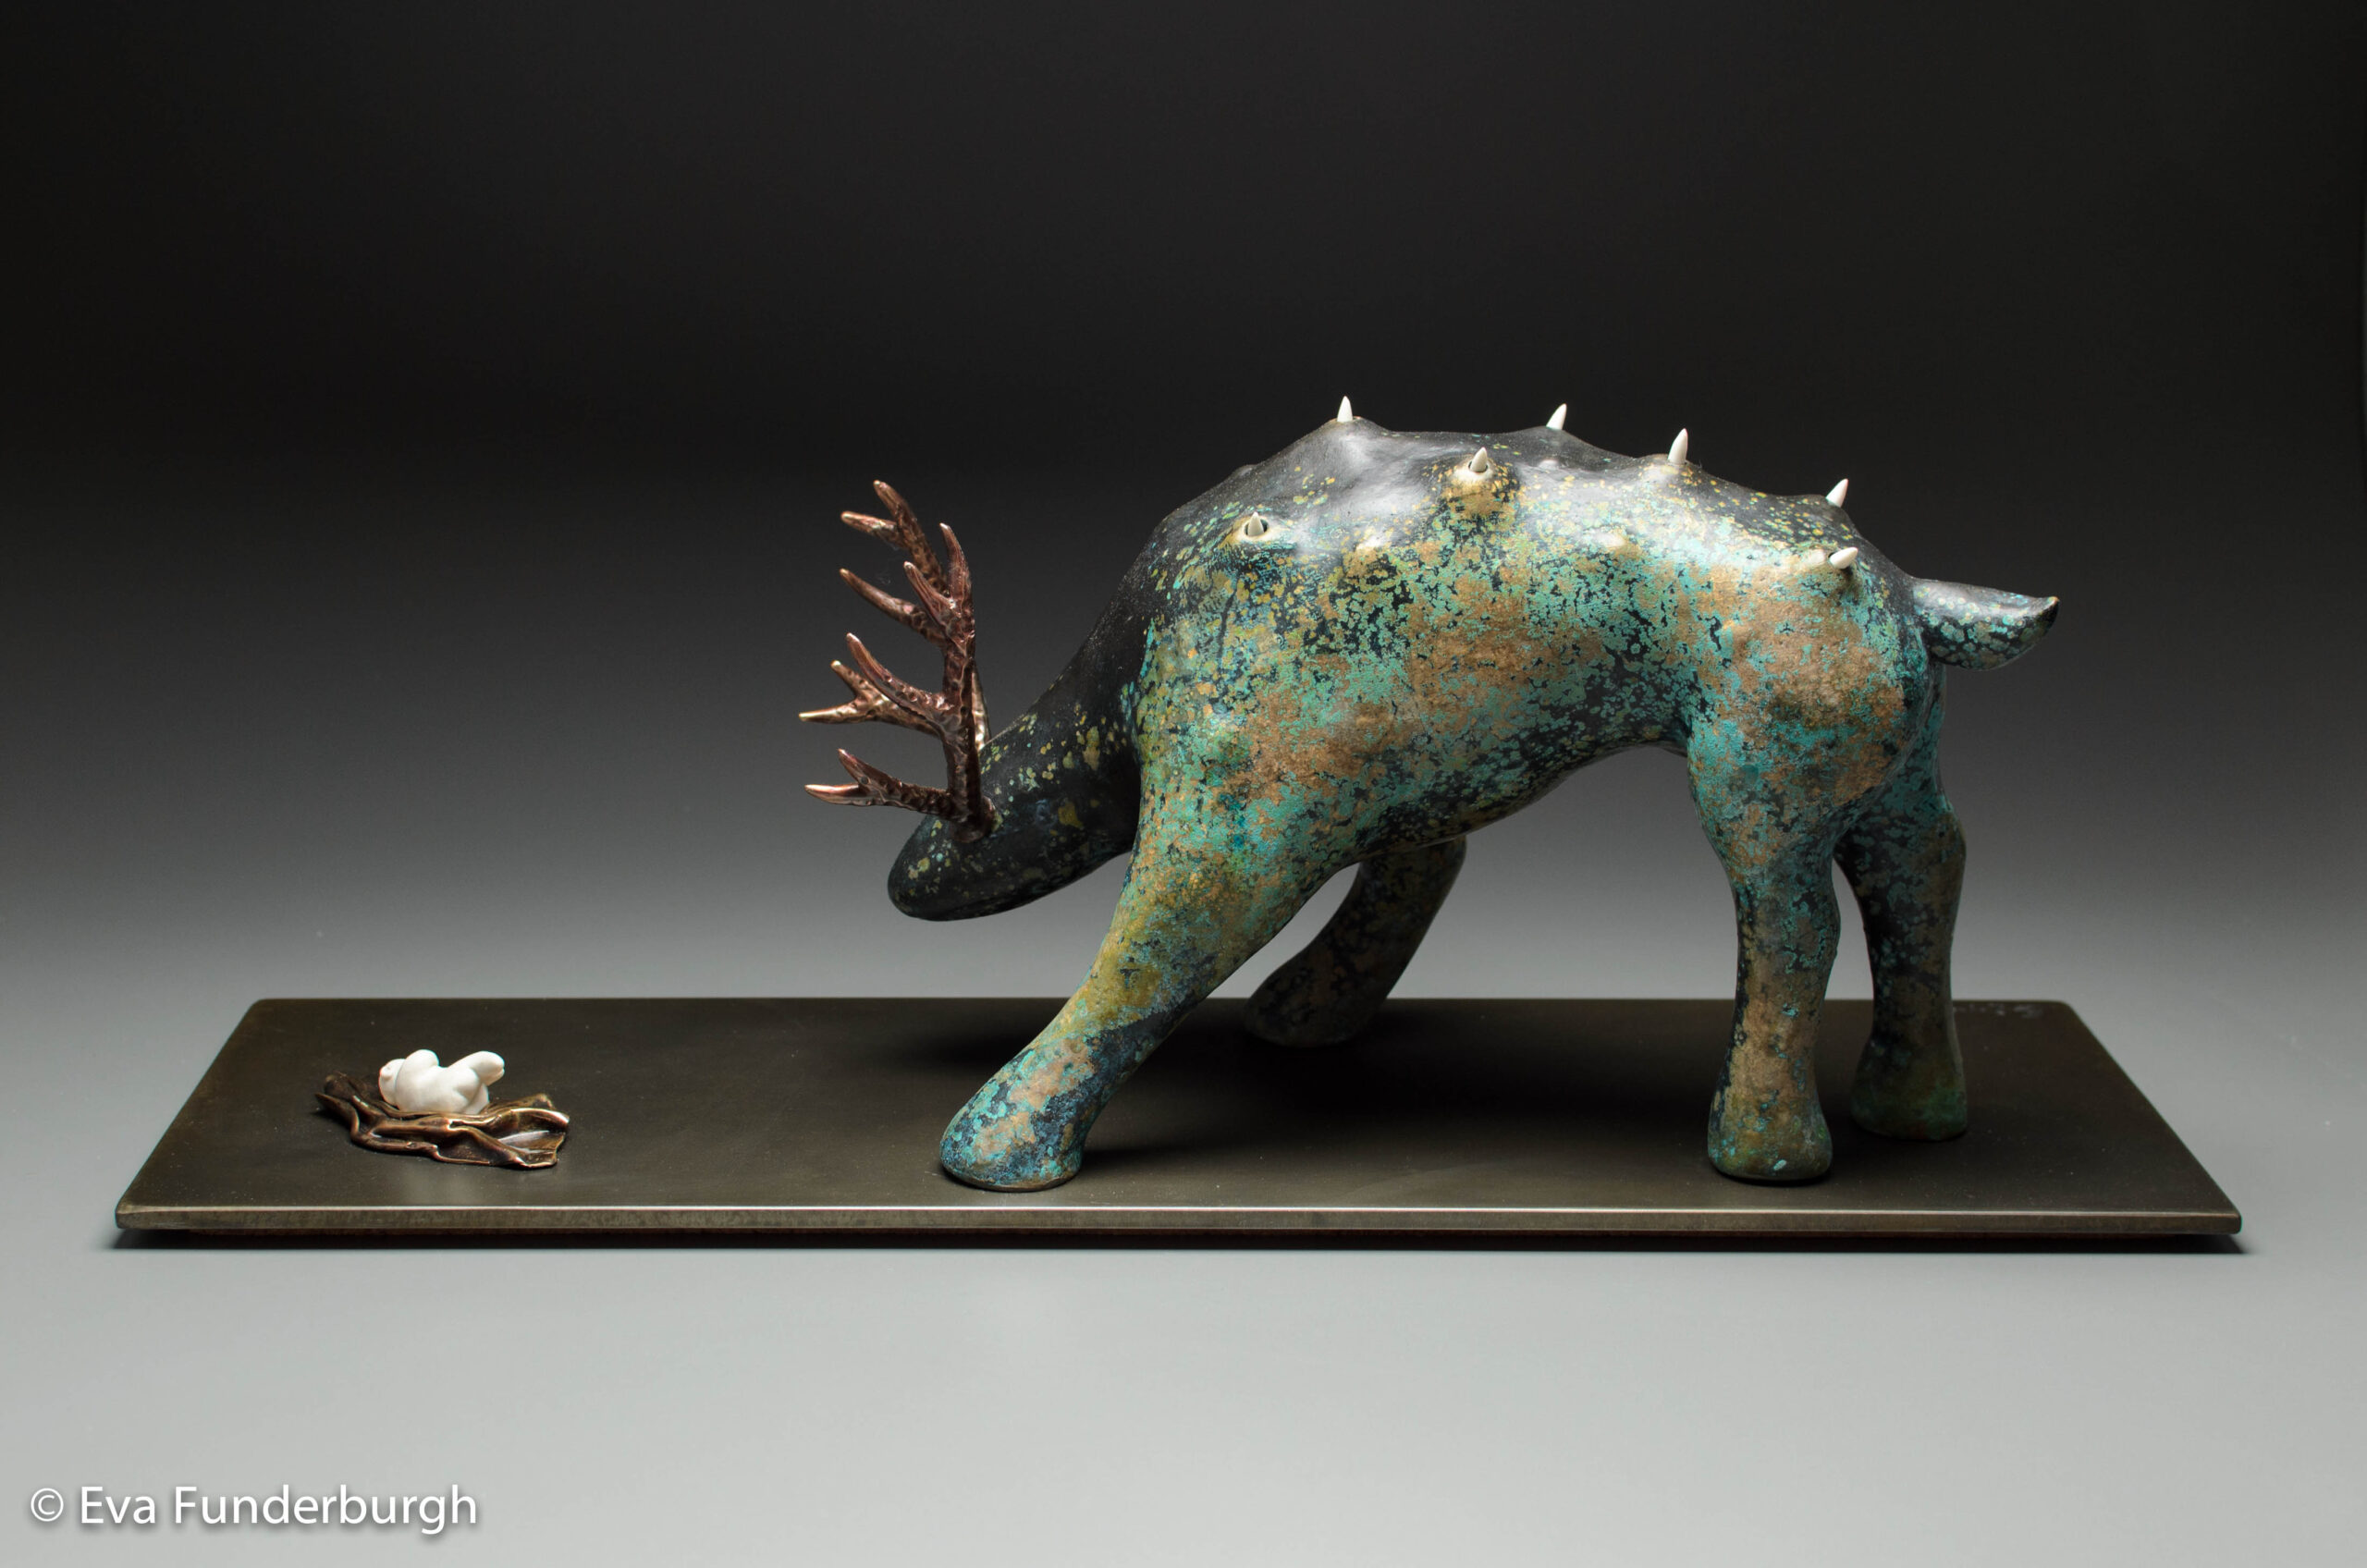 Eva Funderburgh (Seattle), The Invader, 2014, bronze, porcelain, steel base, 8.5”h x 22"w x 7.5”d, Collection of the Artist